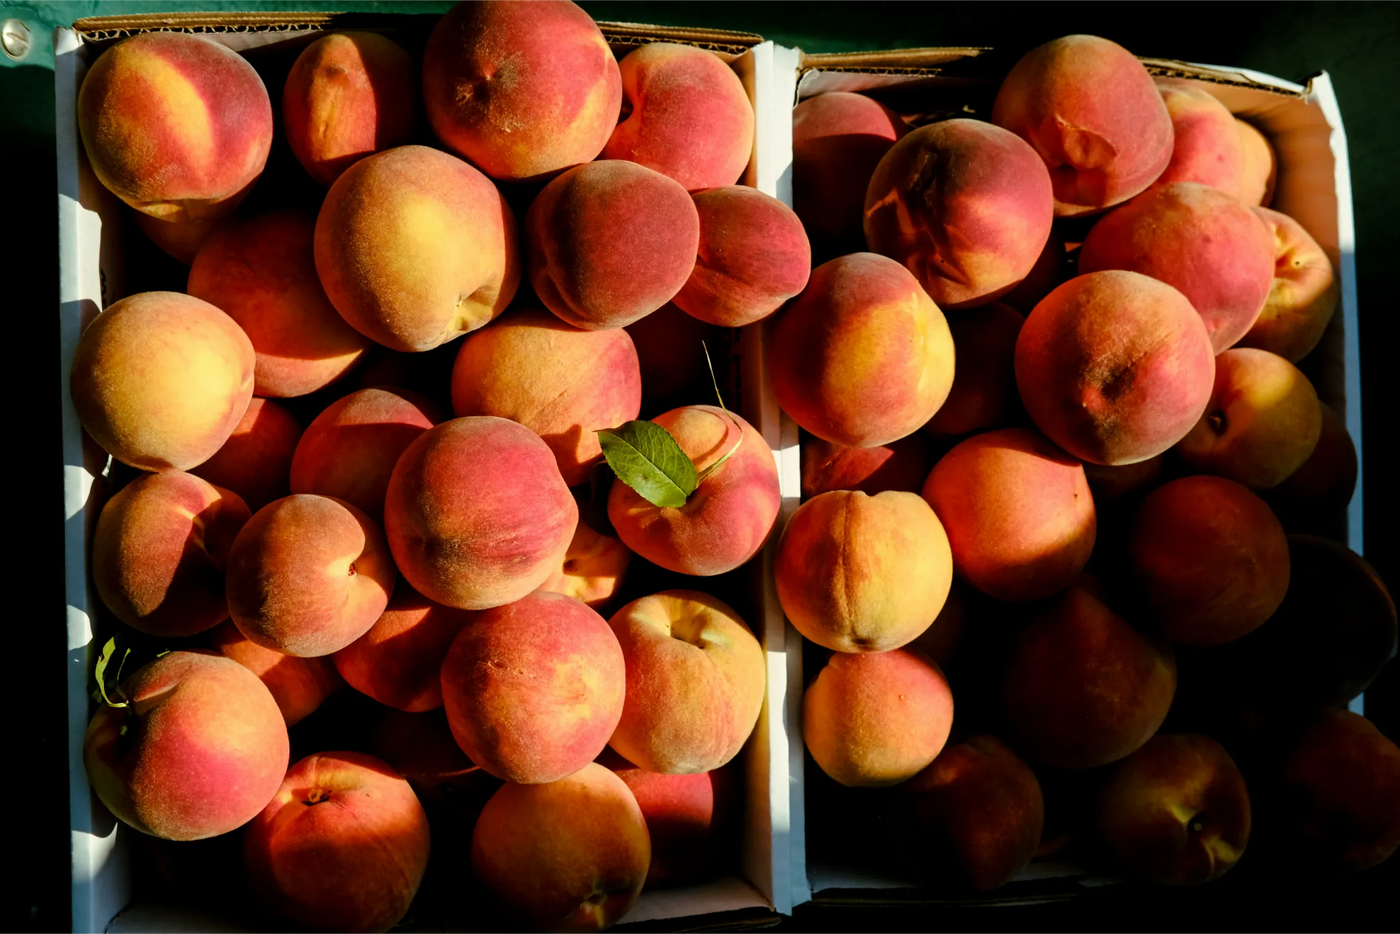 Boxes overflowing with fresh peaches